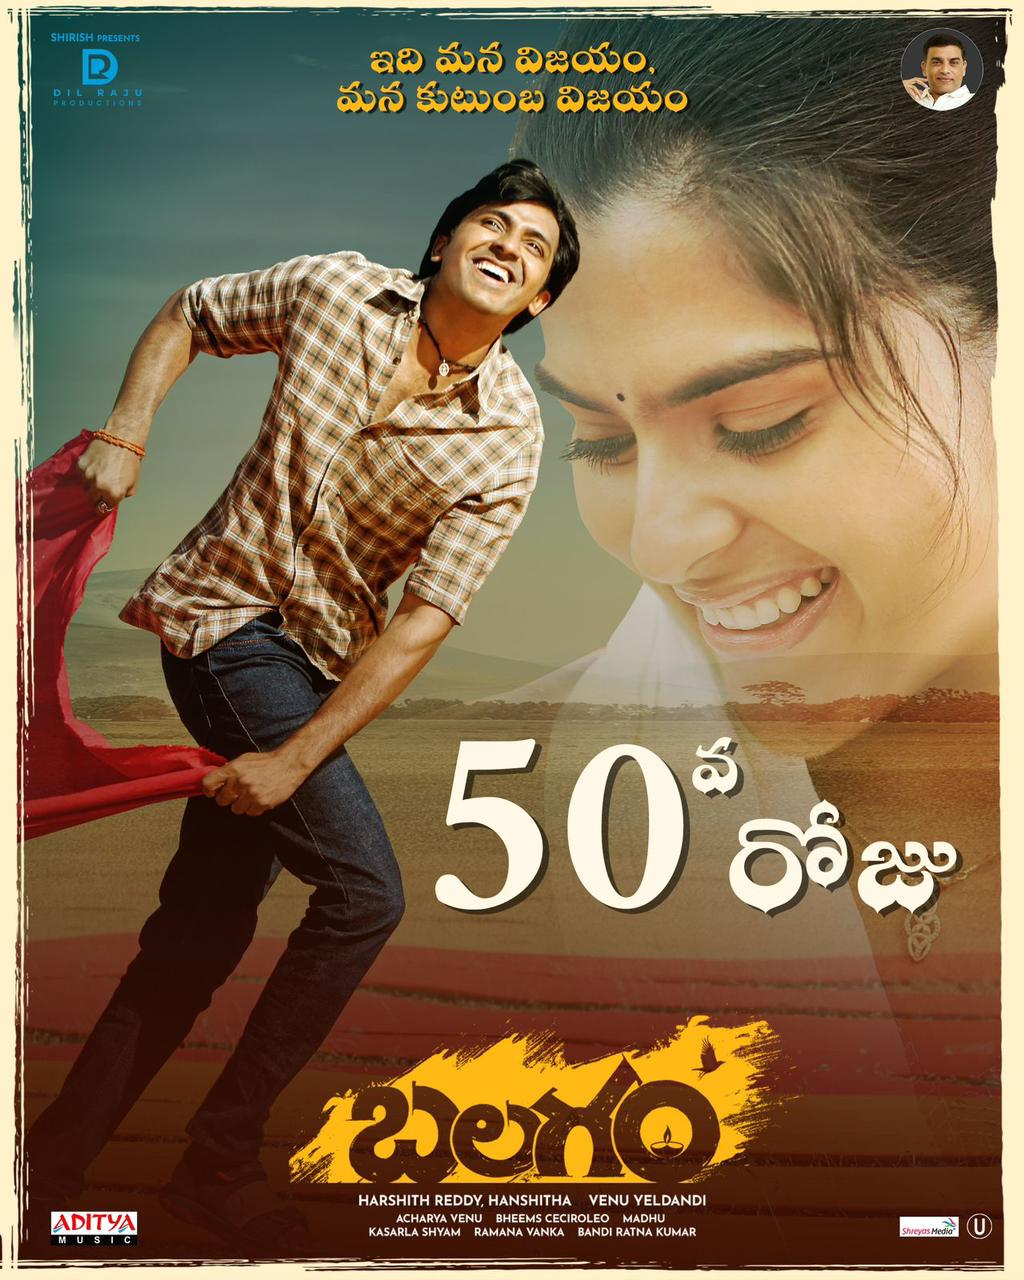 Dil Raju Priyadarshi Balagam movie completed 50days in theater